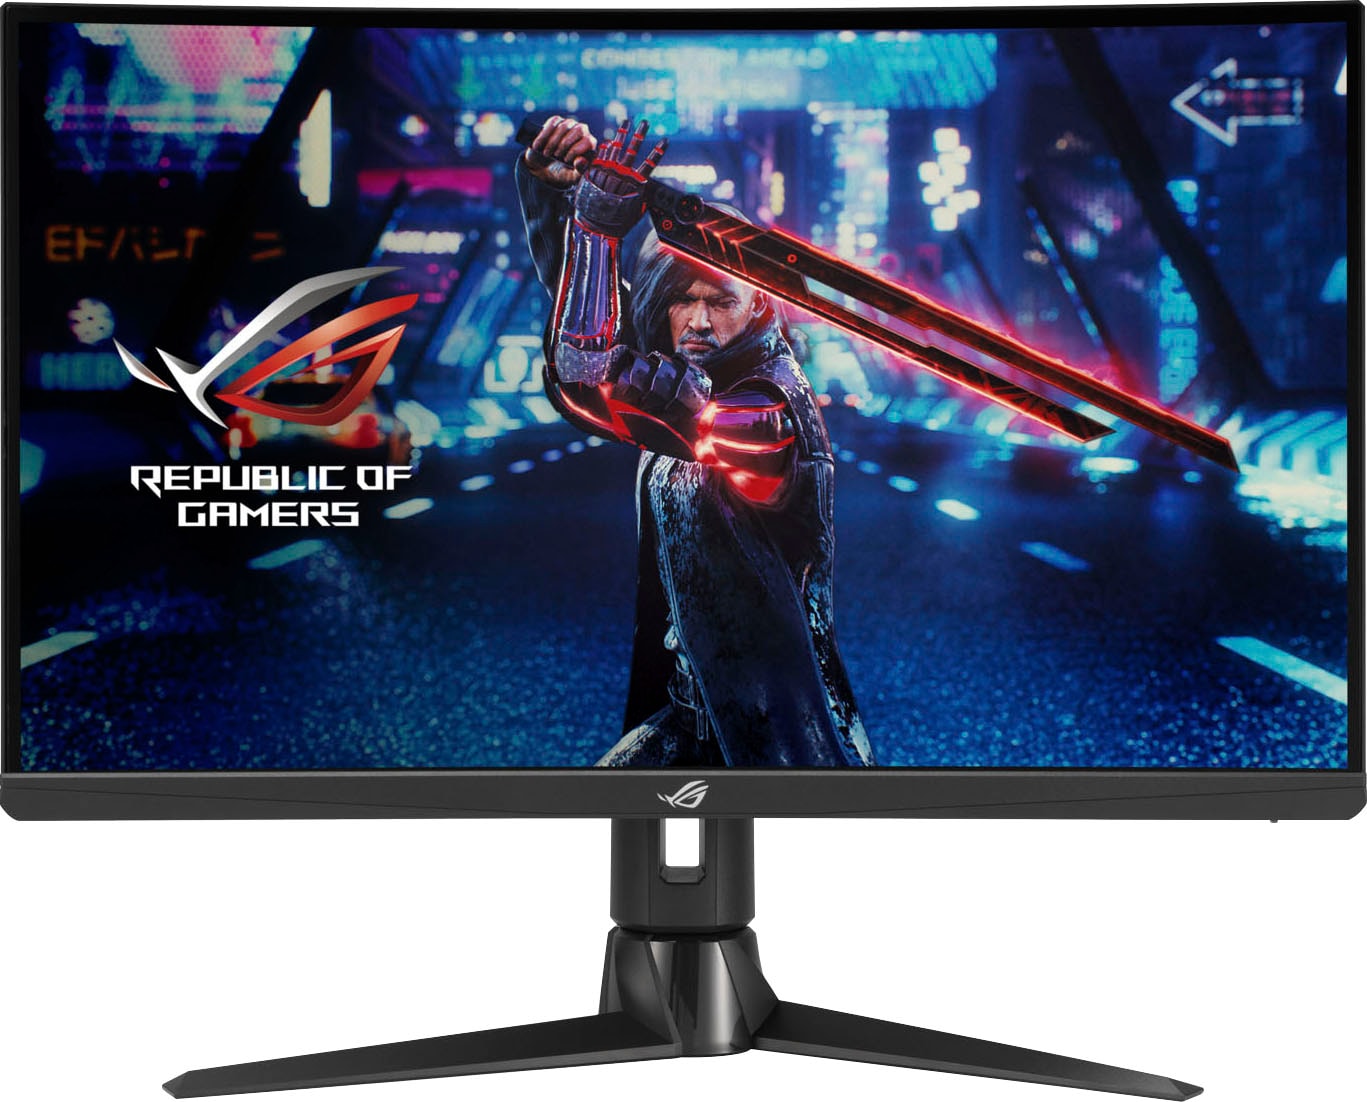 LED-Monitor »ASUS Monitor«, 68,6 cm/27 Zoll, 2560 x 1440 px, Wide Quad HD, 1 ms...